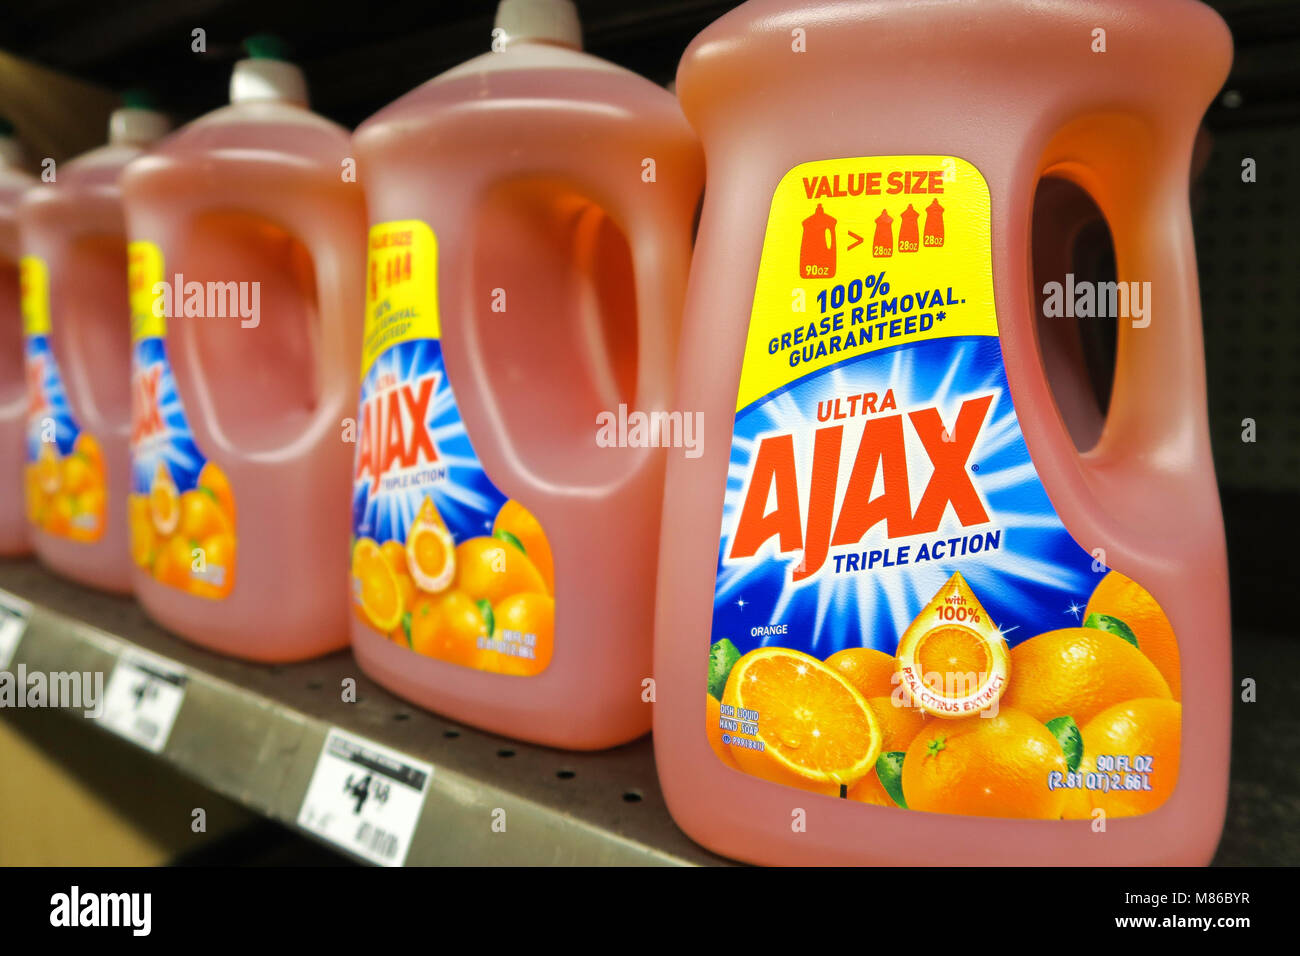 Home Depot Cleaning Products Store Display, NYC Stock Photo